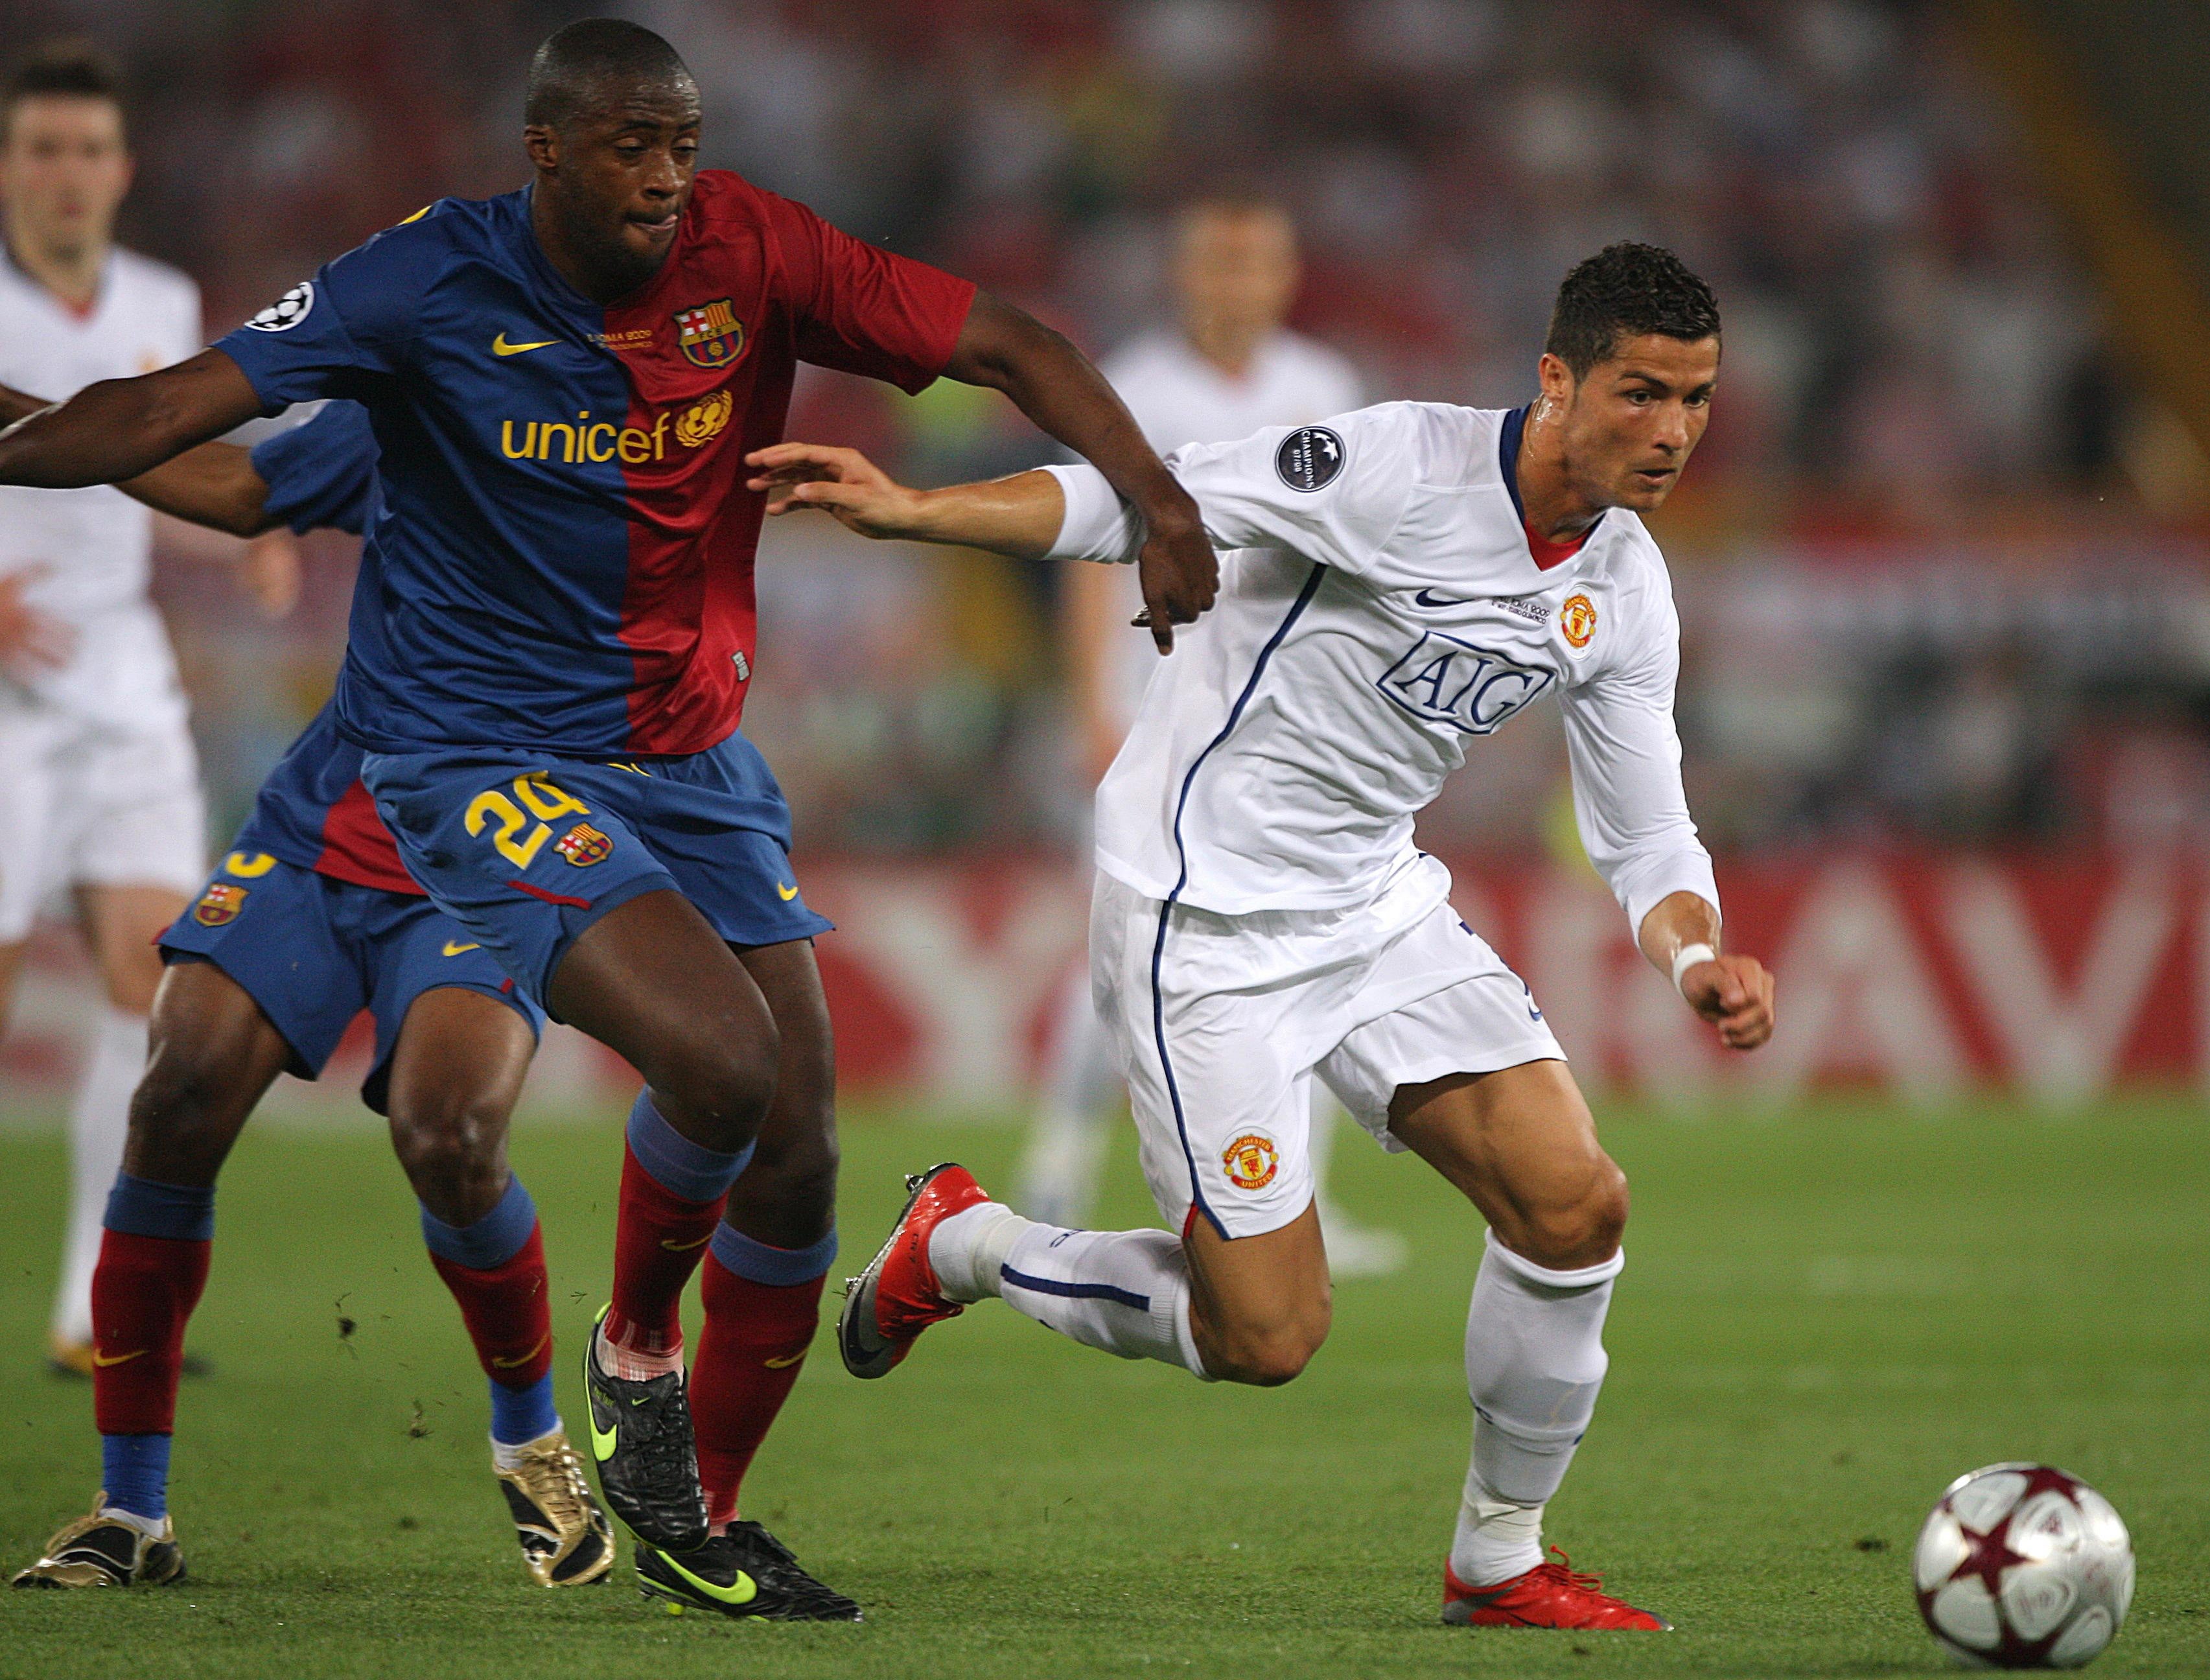 Ronaldo’s last match for Manchester United before signing for Real Madrid was in the Champions League final defeat to Barcelona in Rome (Nick Potts/PA)